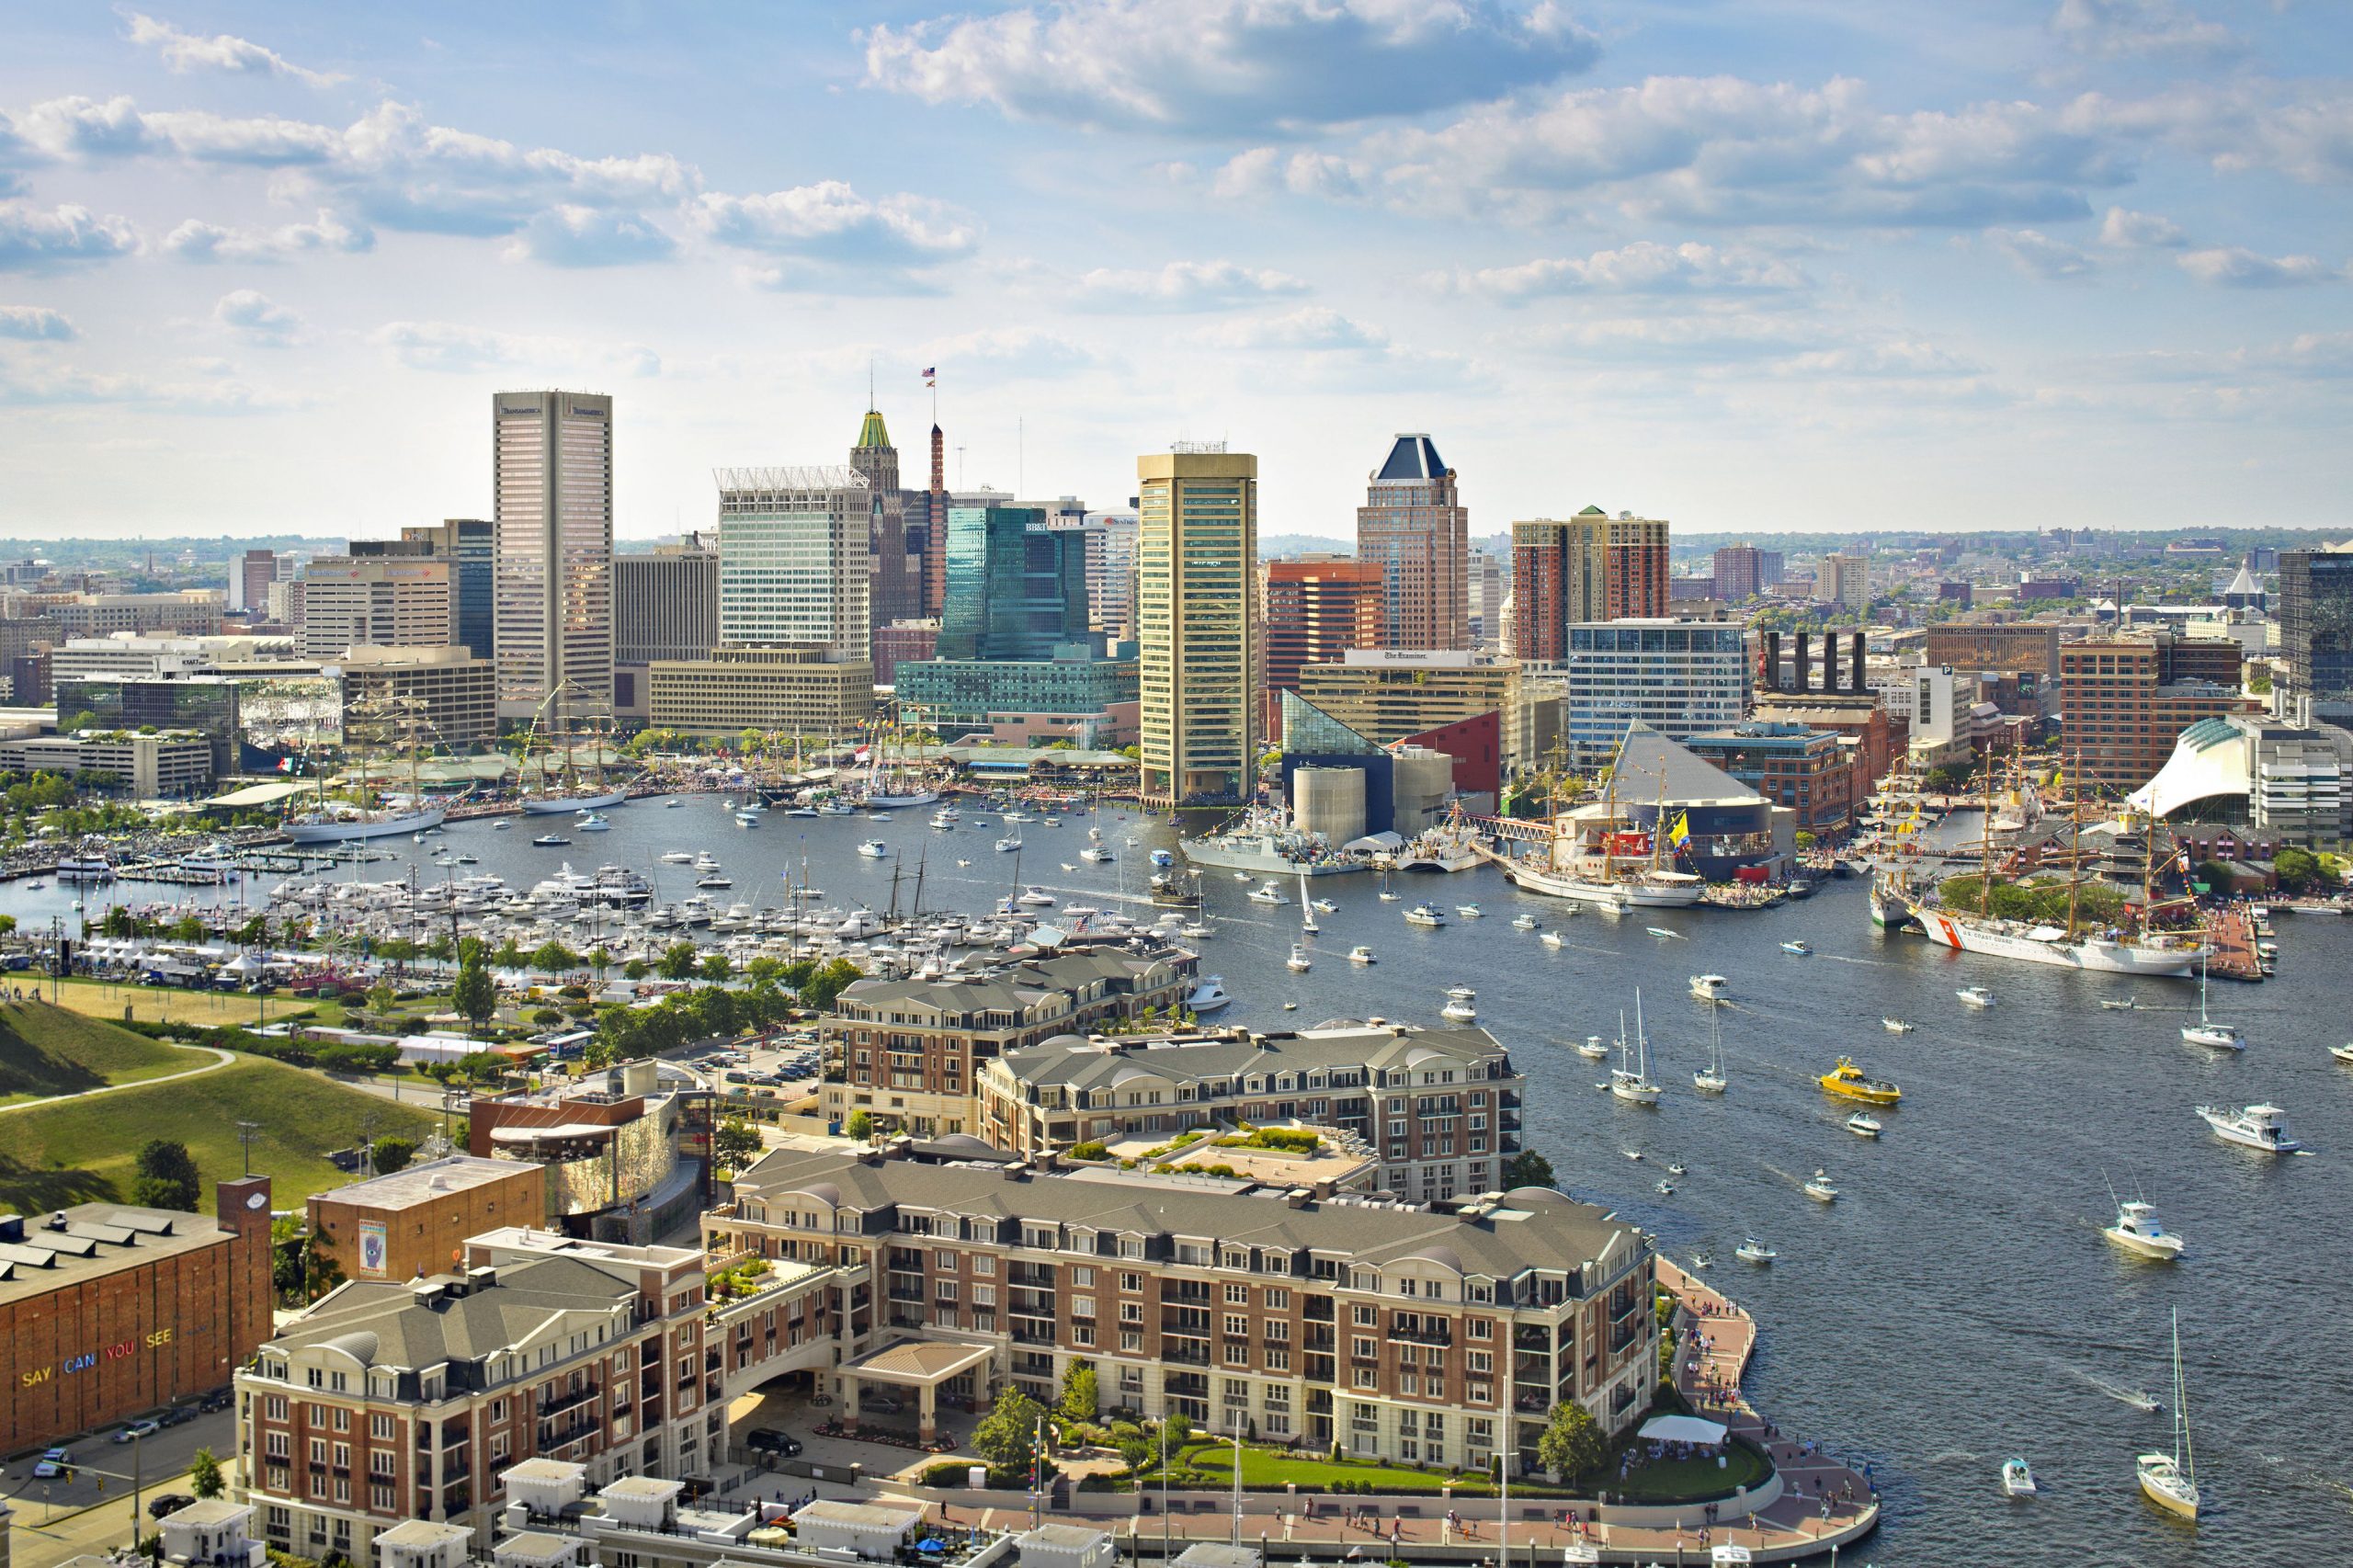 baltimore-skyline-and-inner-harbor-159327786-578bfe305f9b584d20176df2